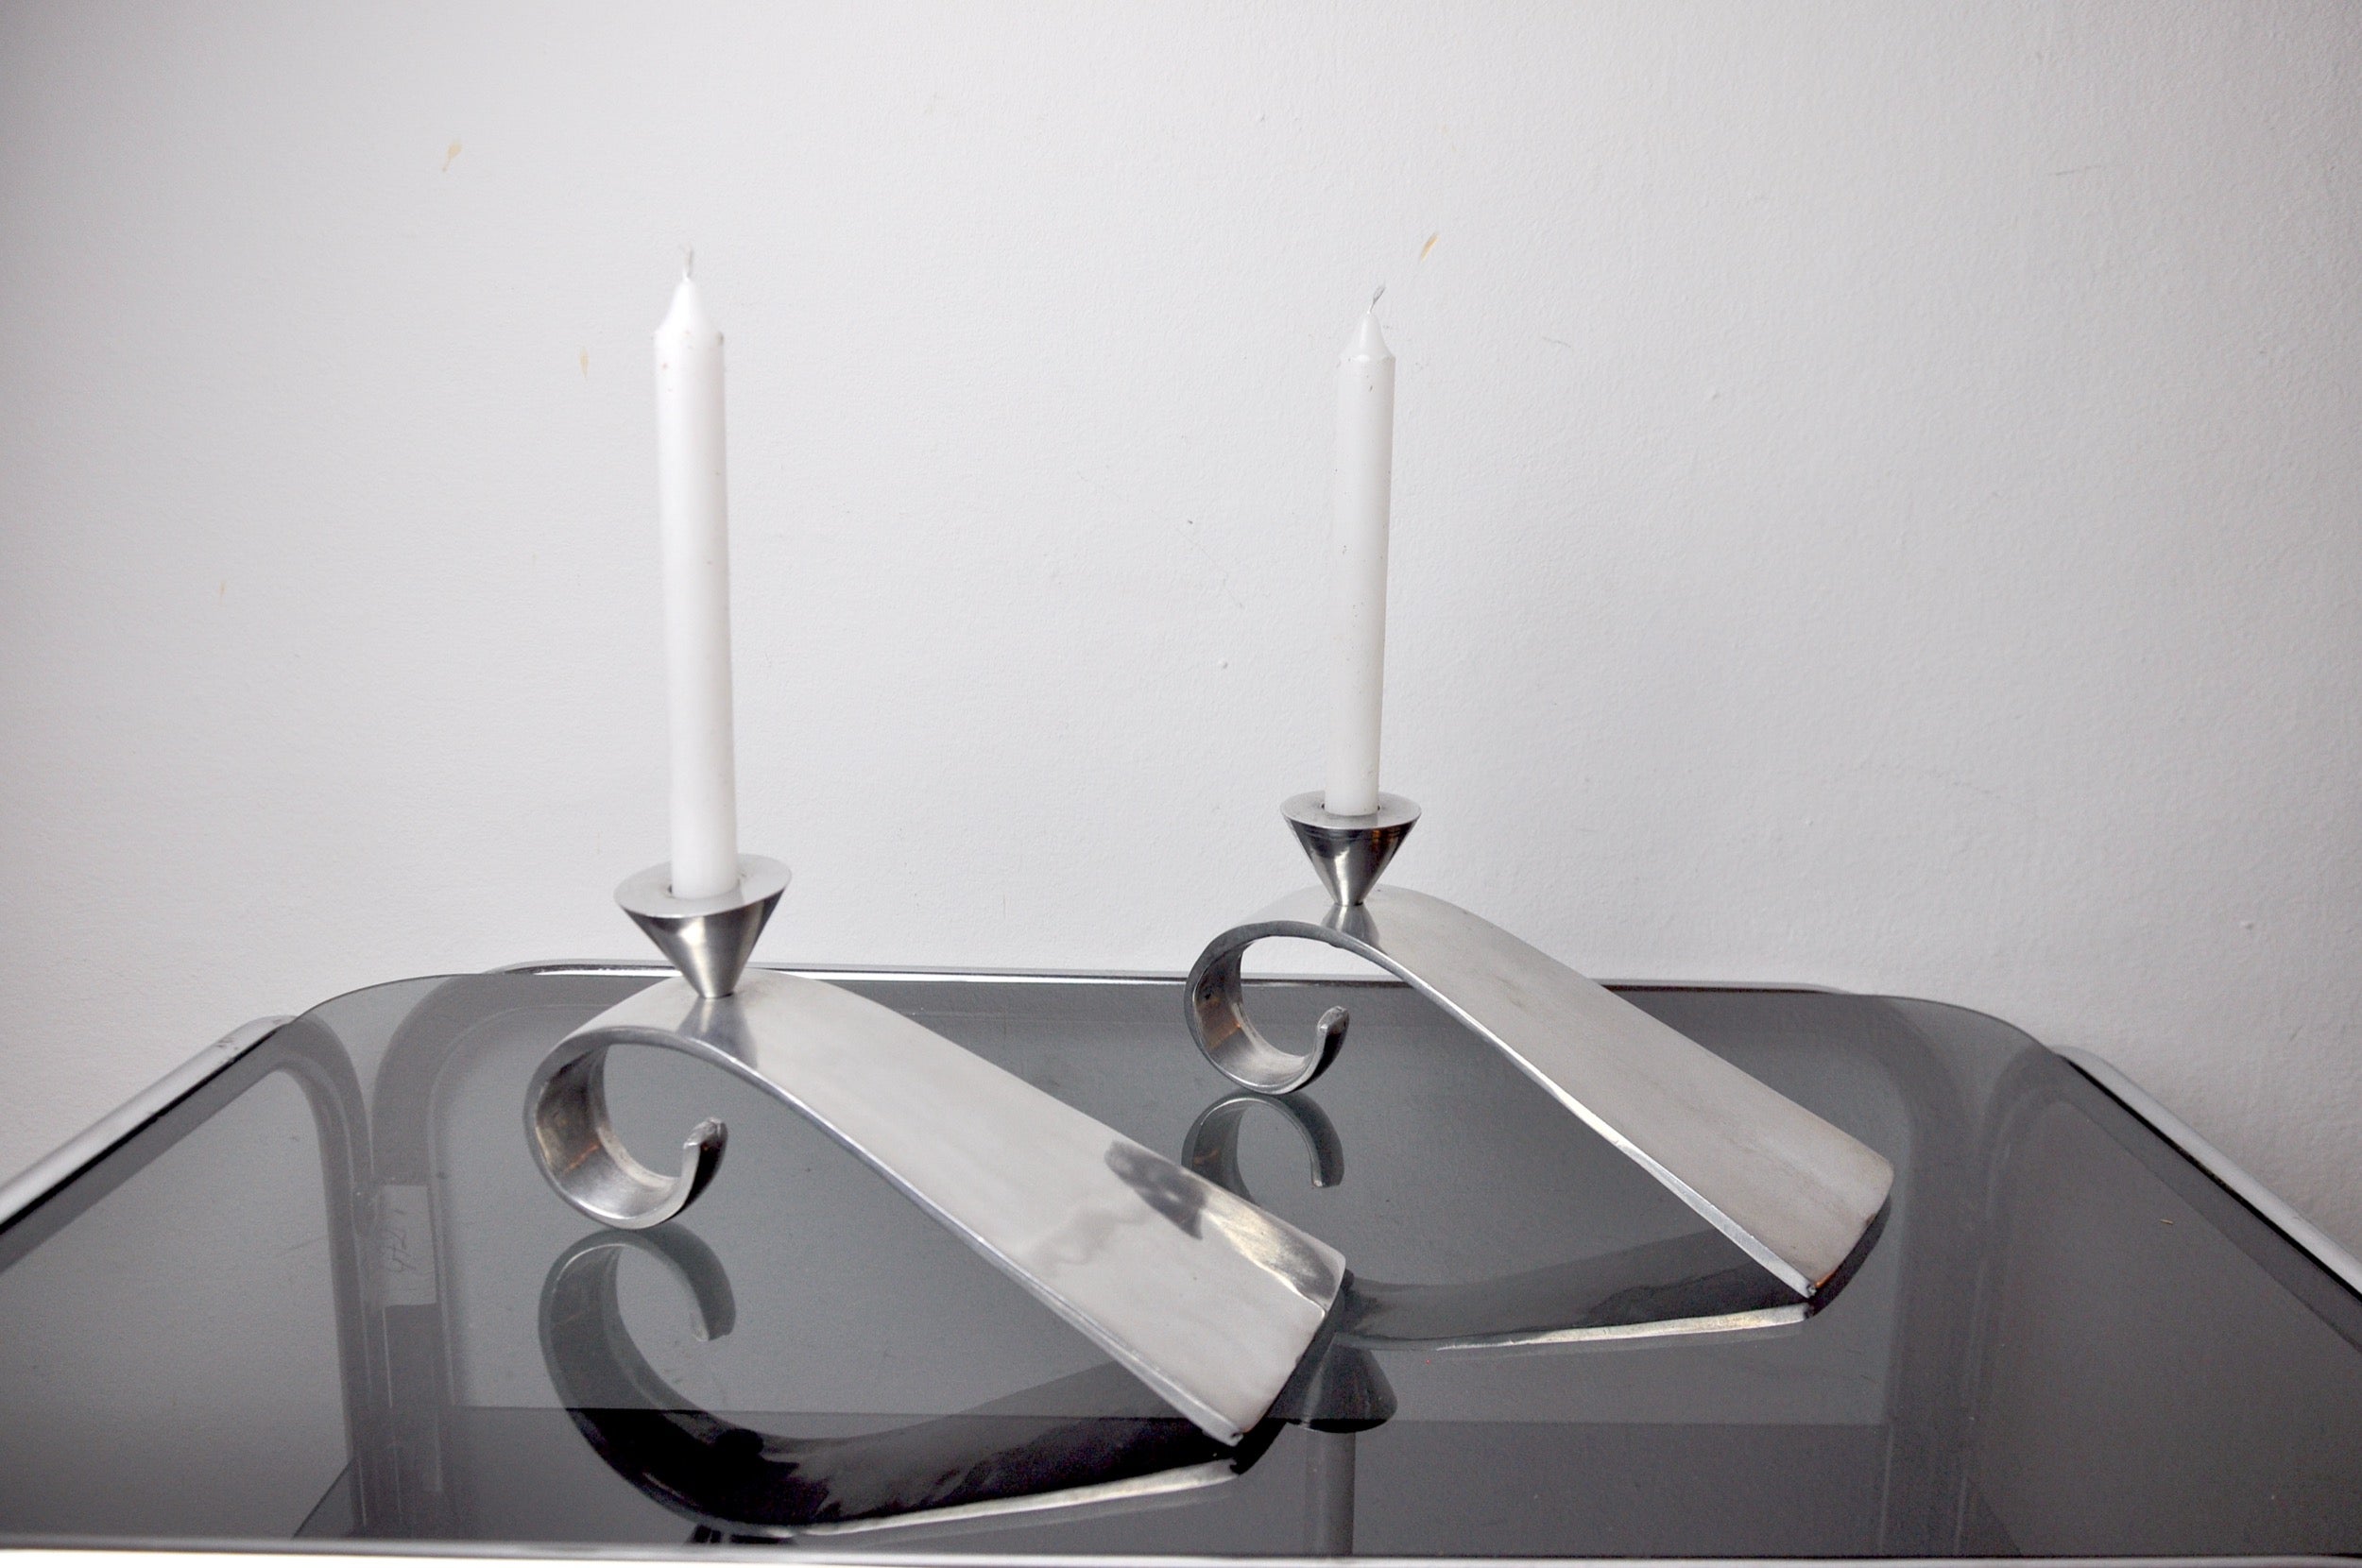 Pair of comma candlesticks designed and produced by matthew hilton in england in the 1980s.

Pair of brutalist style aluminum candle holders.

Beautiful decorative objects that will bring a real design touch to your interior.

Very nice state